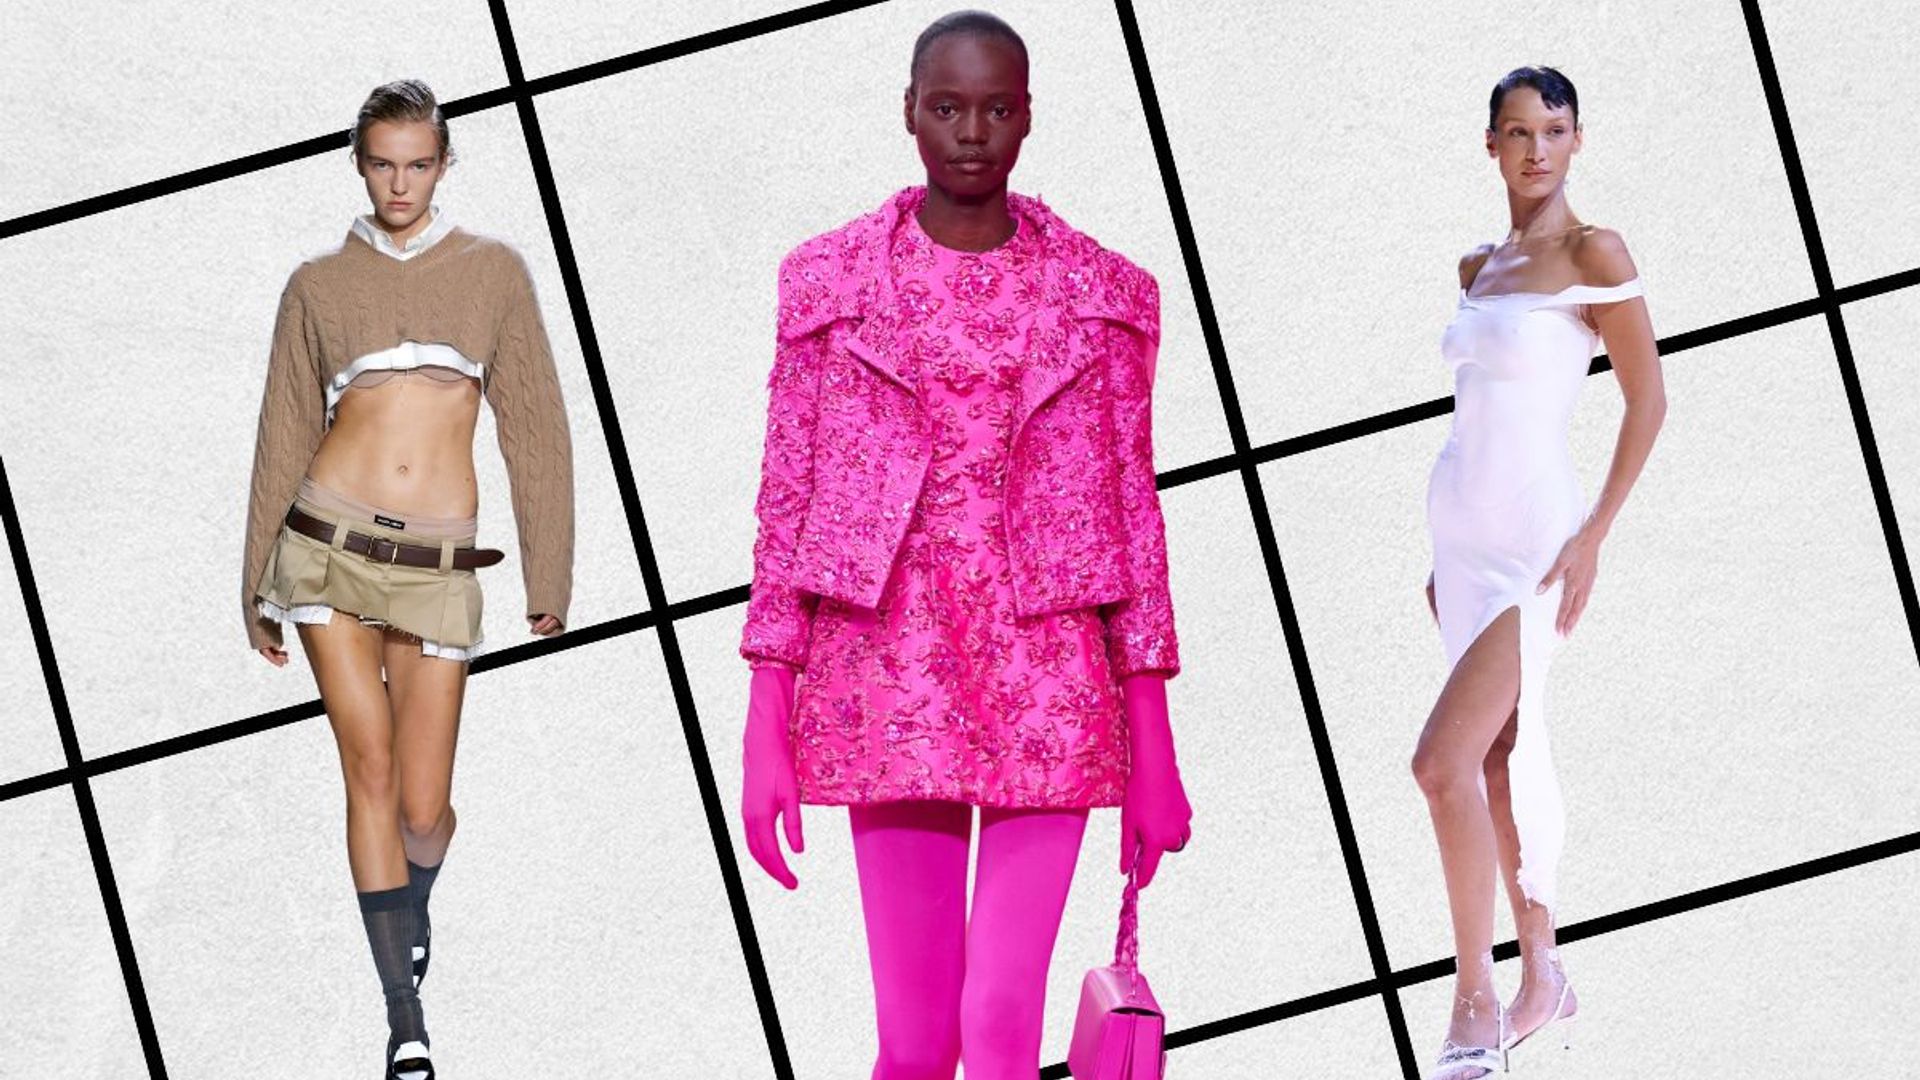 The biggest fashion trends of 2022 have been revealed